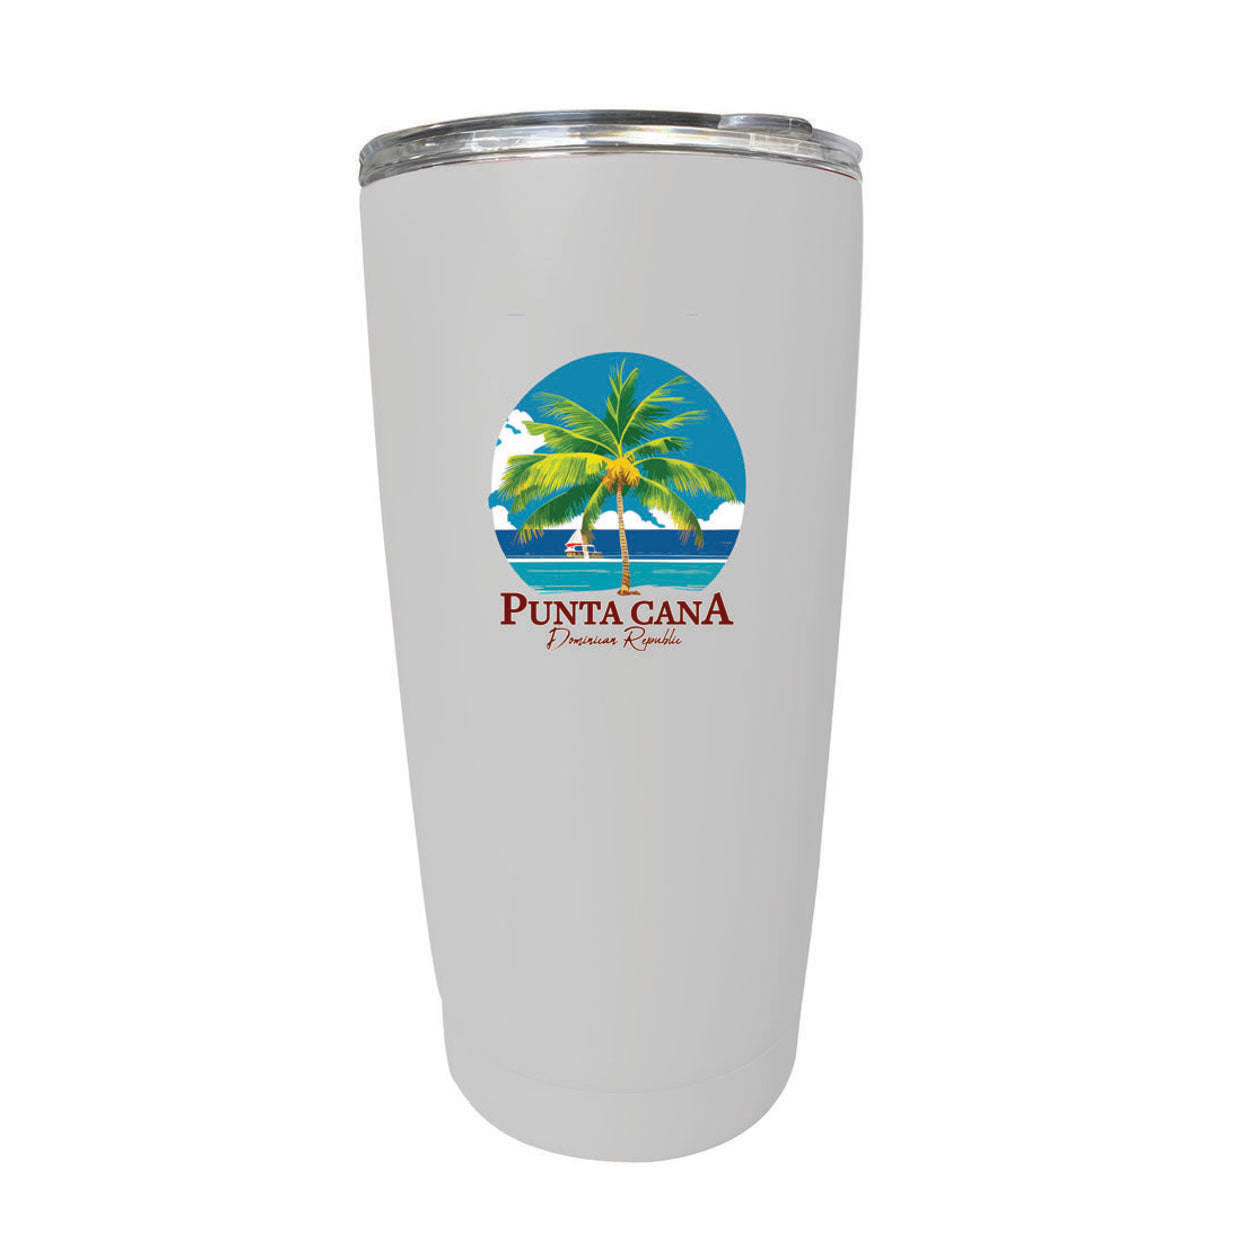 Punta Cana Dominican Republic Souvenir 16 Oz Stainless Steel Insulated Tumbler - White, PALM